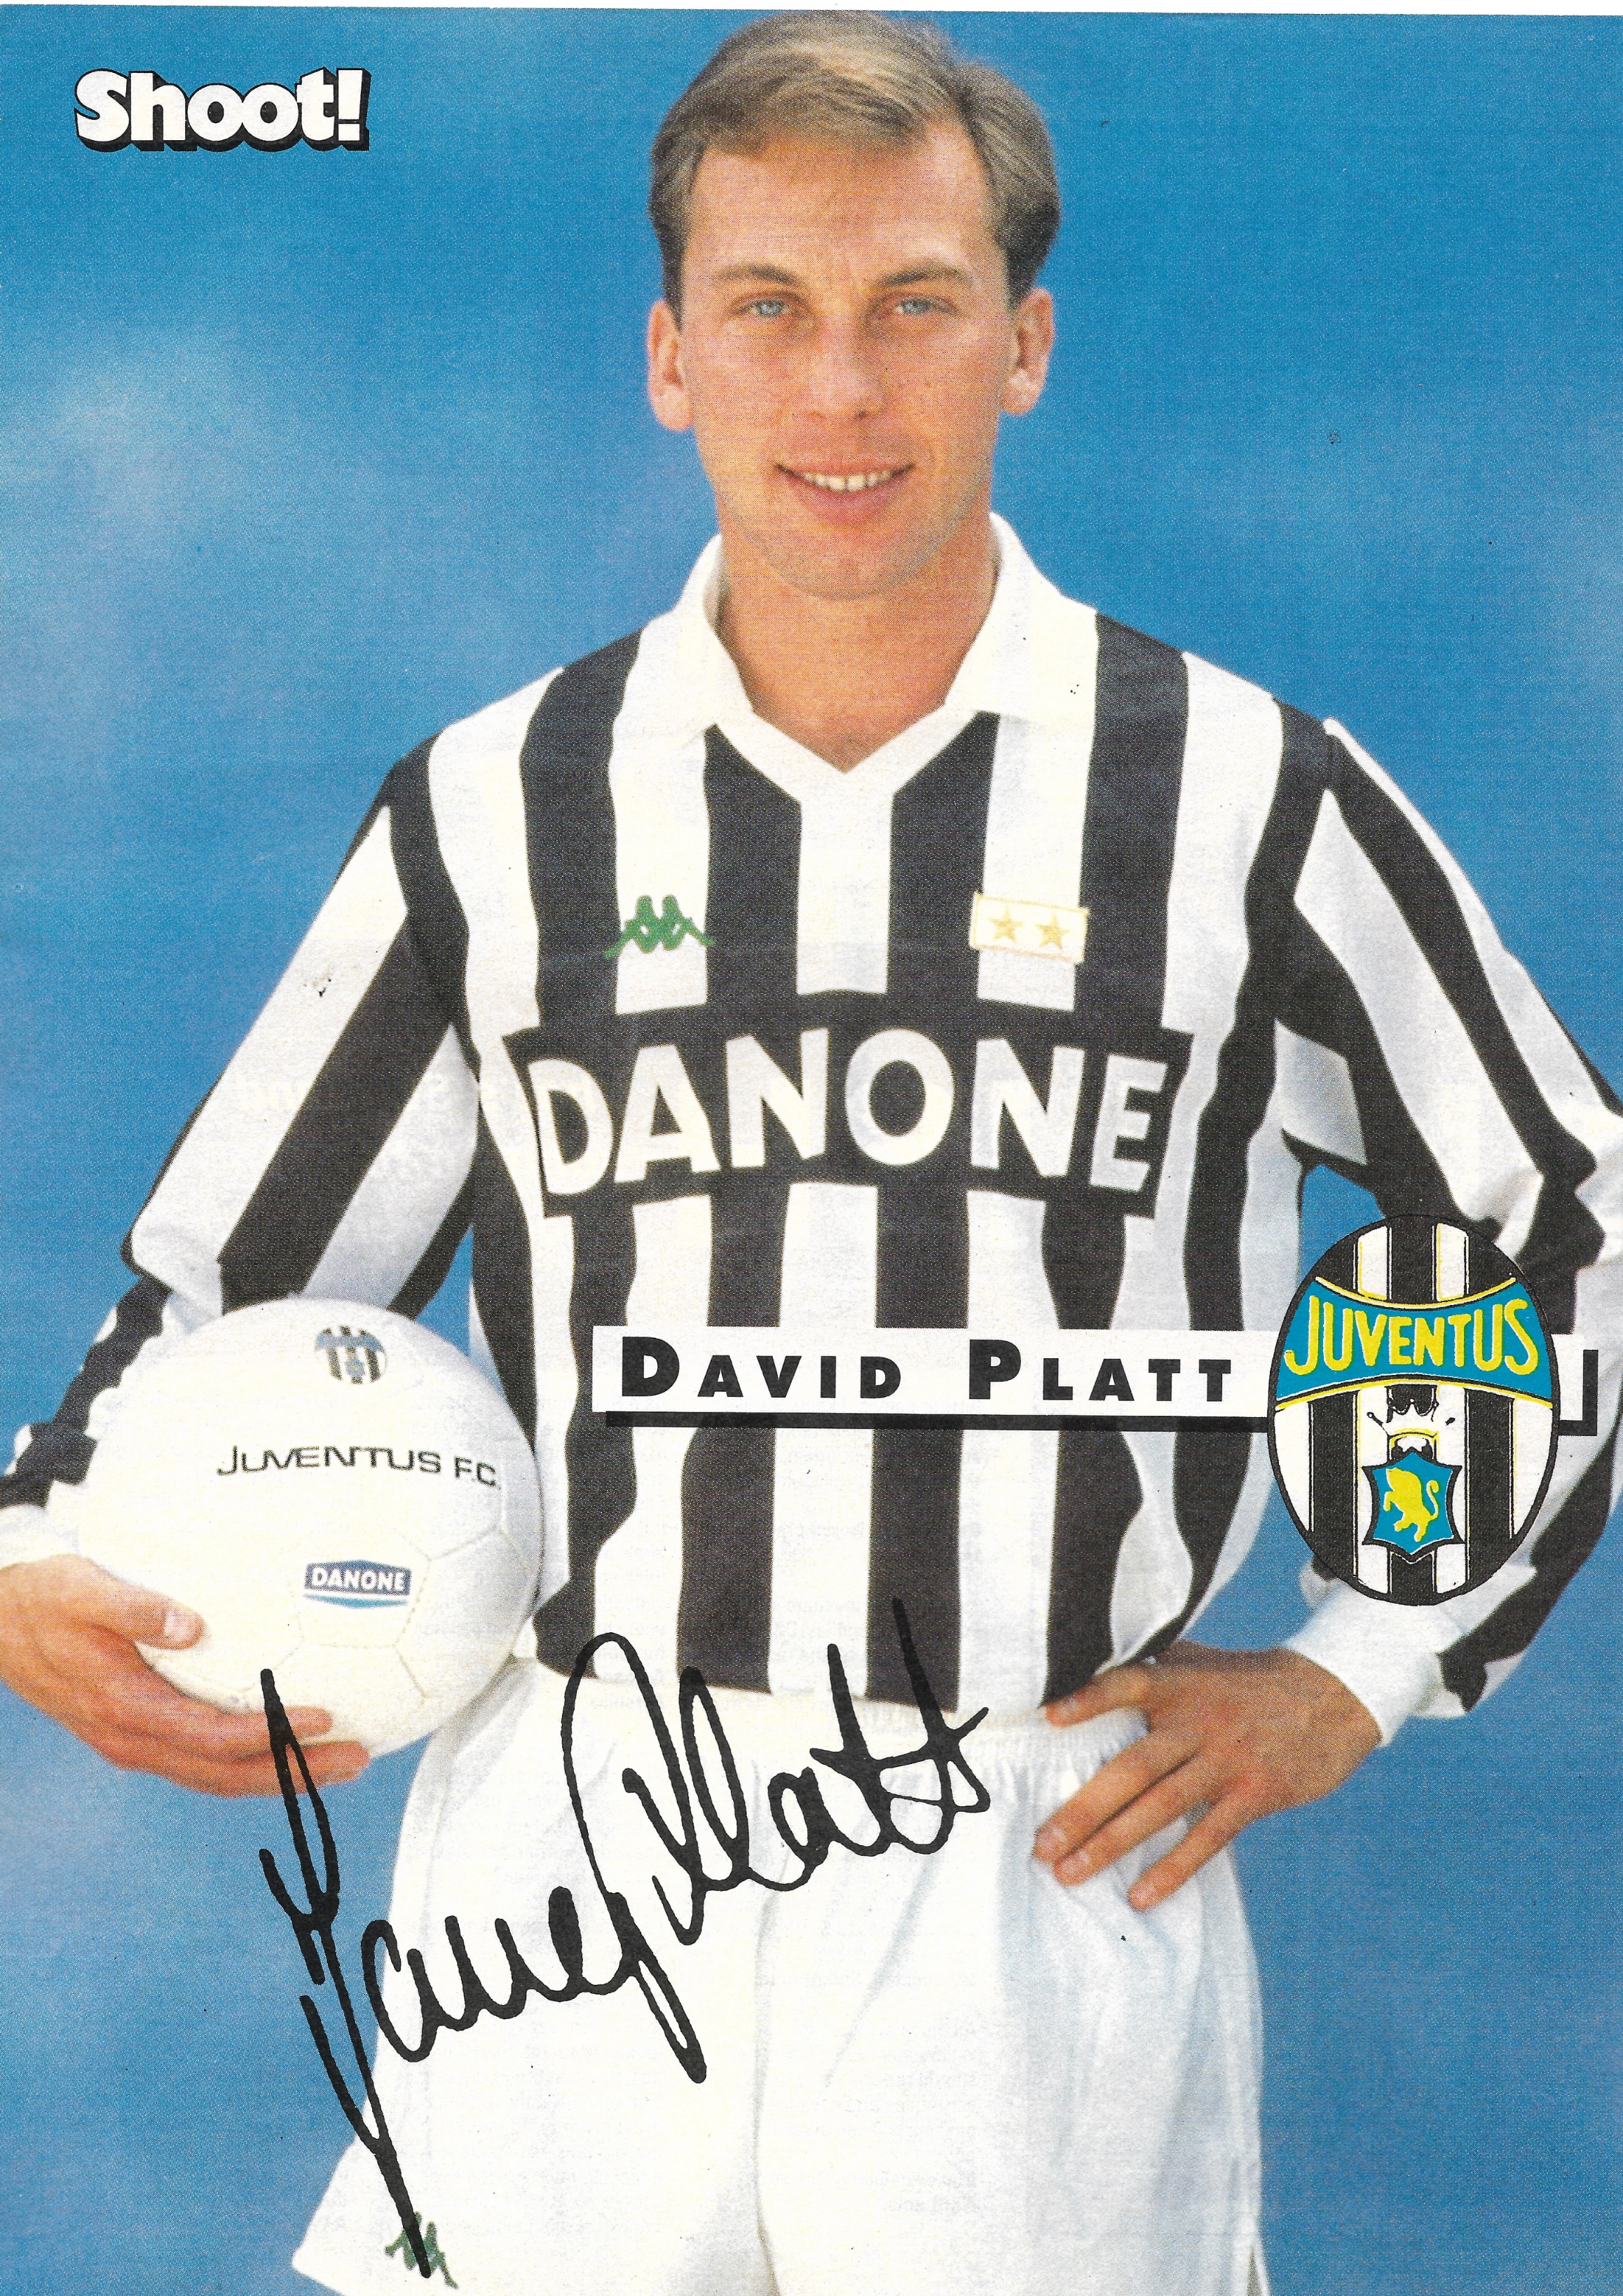 Ross Howard on X: "David Platt from 1992 wishing you a happy new year 2021.  You're welcome #theSerieAyears #juventus #shootmagazine #90sfootball  https://t.co/5Px6A5Bt3h" / X